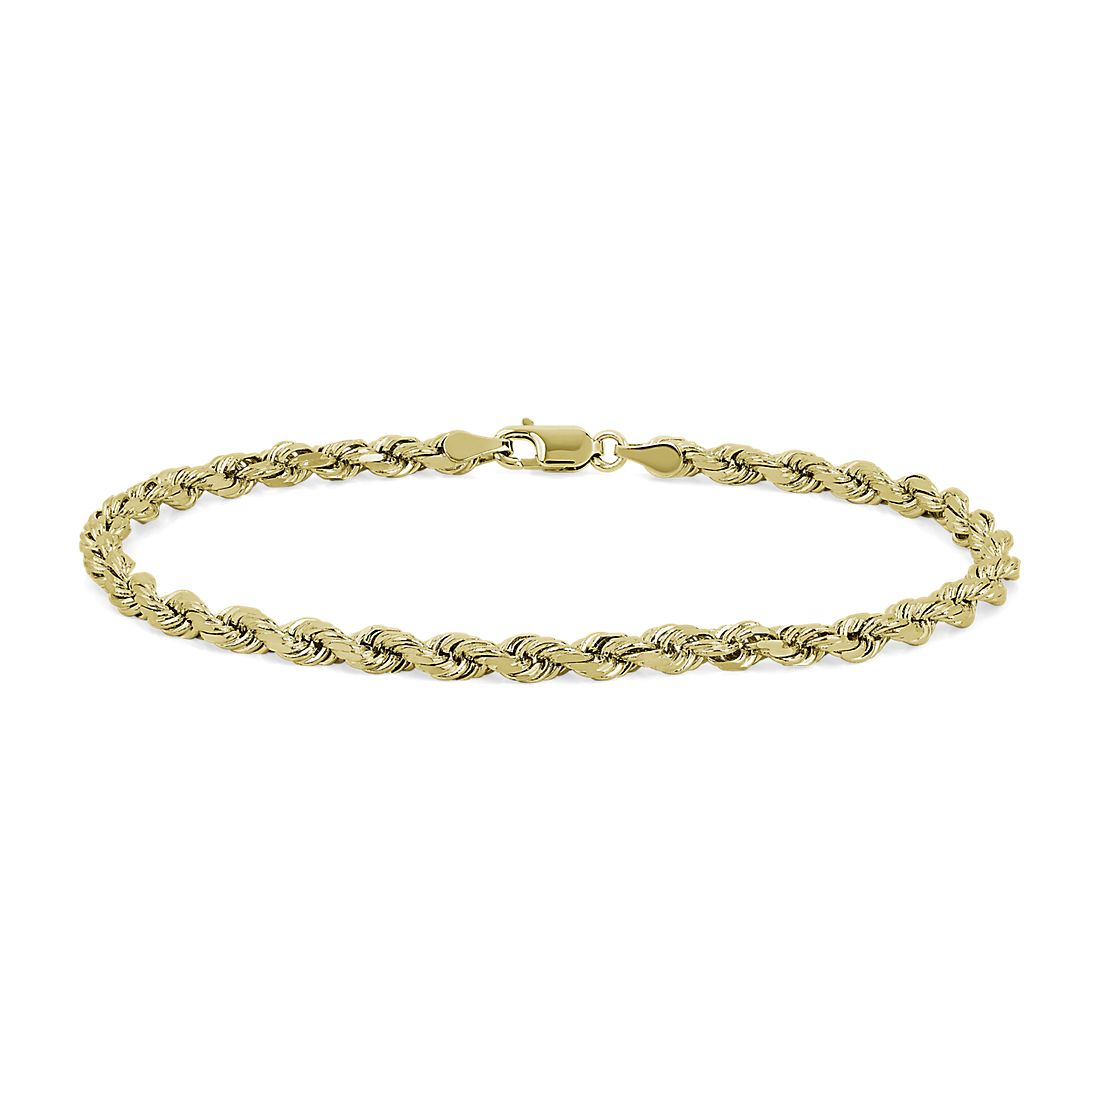 8" Solid Diamond Cut Rope Chain Bracelet in 14k Yellow Gold (3.8 mm)